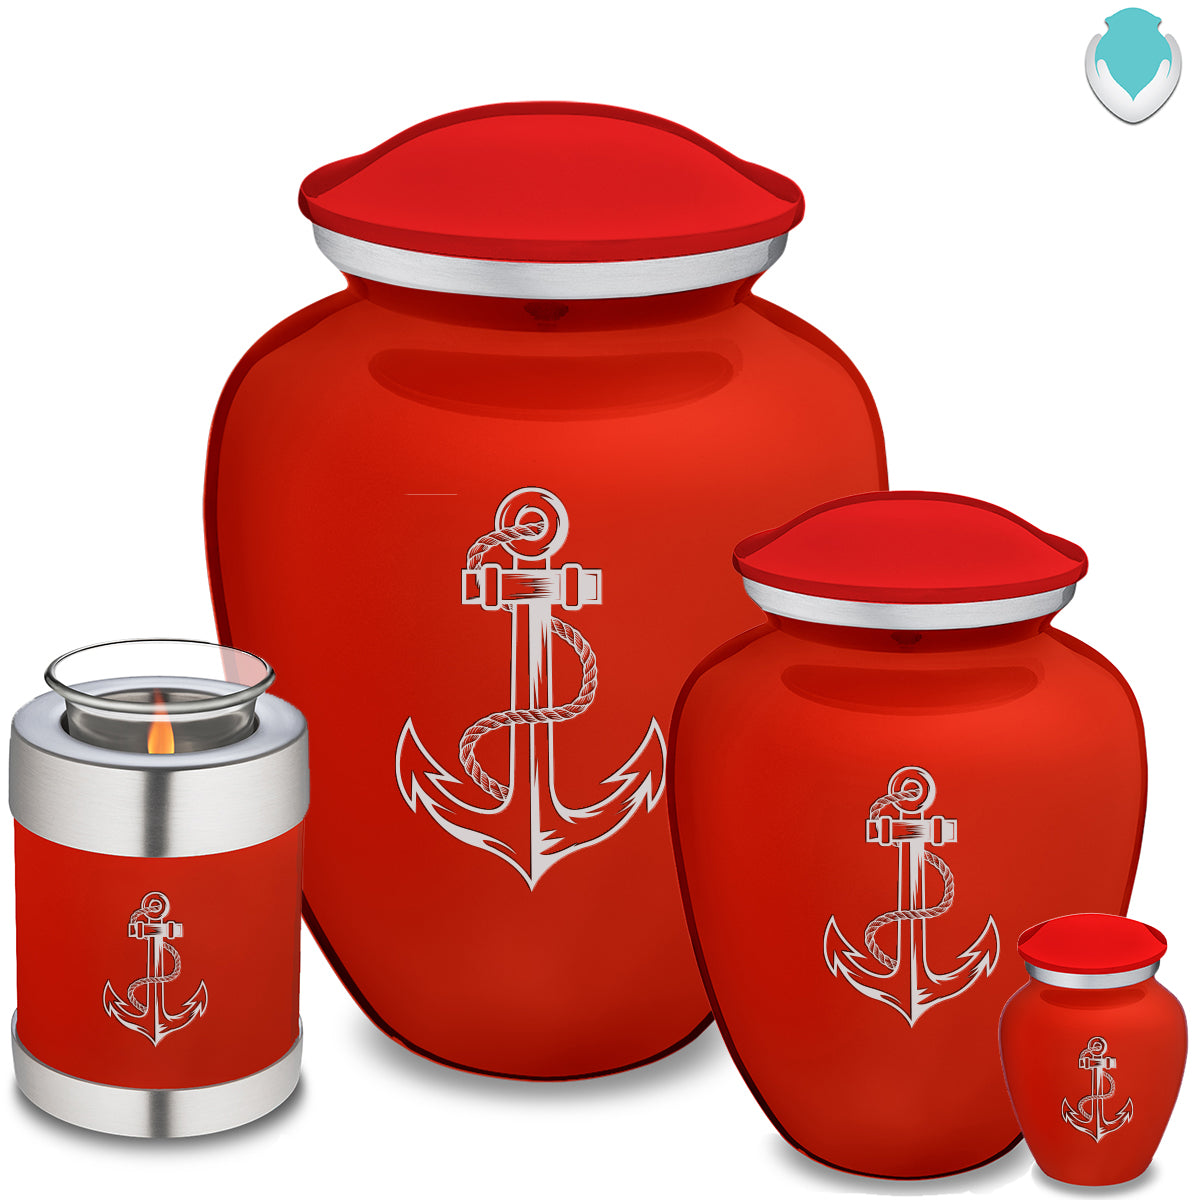 Adult Embrace Bright Red Anchor Cremation Urn